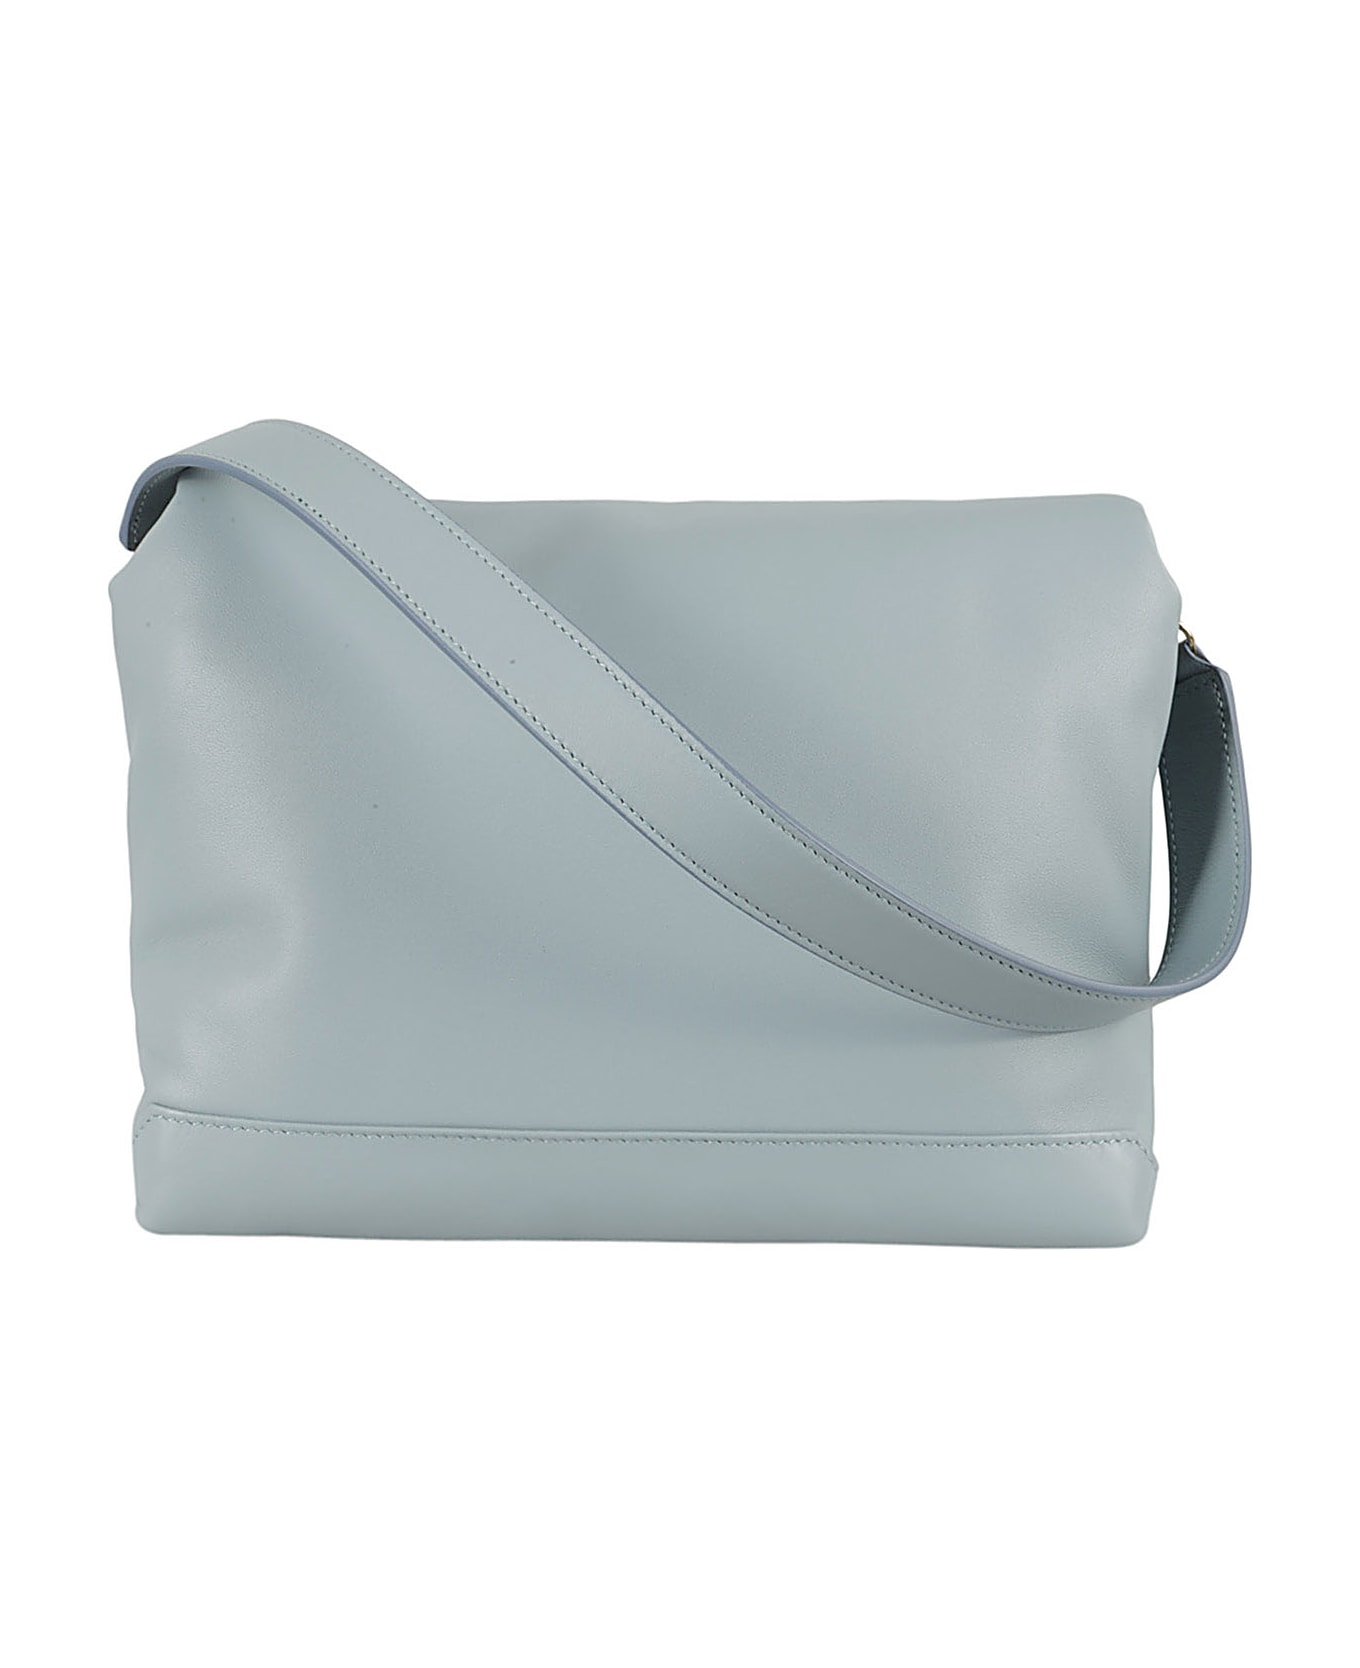 Victoria Beckham Puffy Chain Pouch - Ice ショルダーバッグ